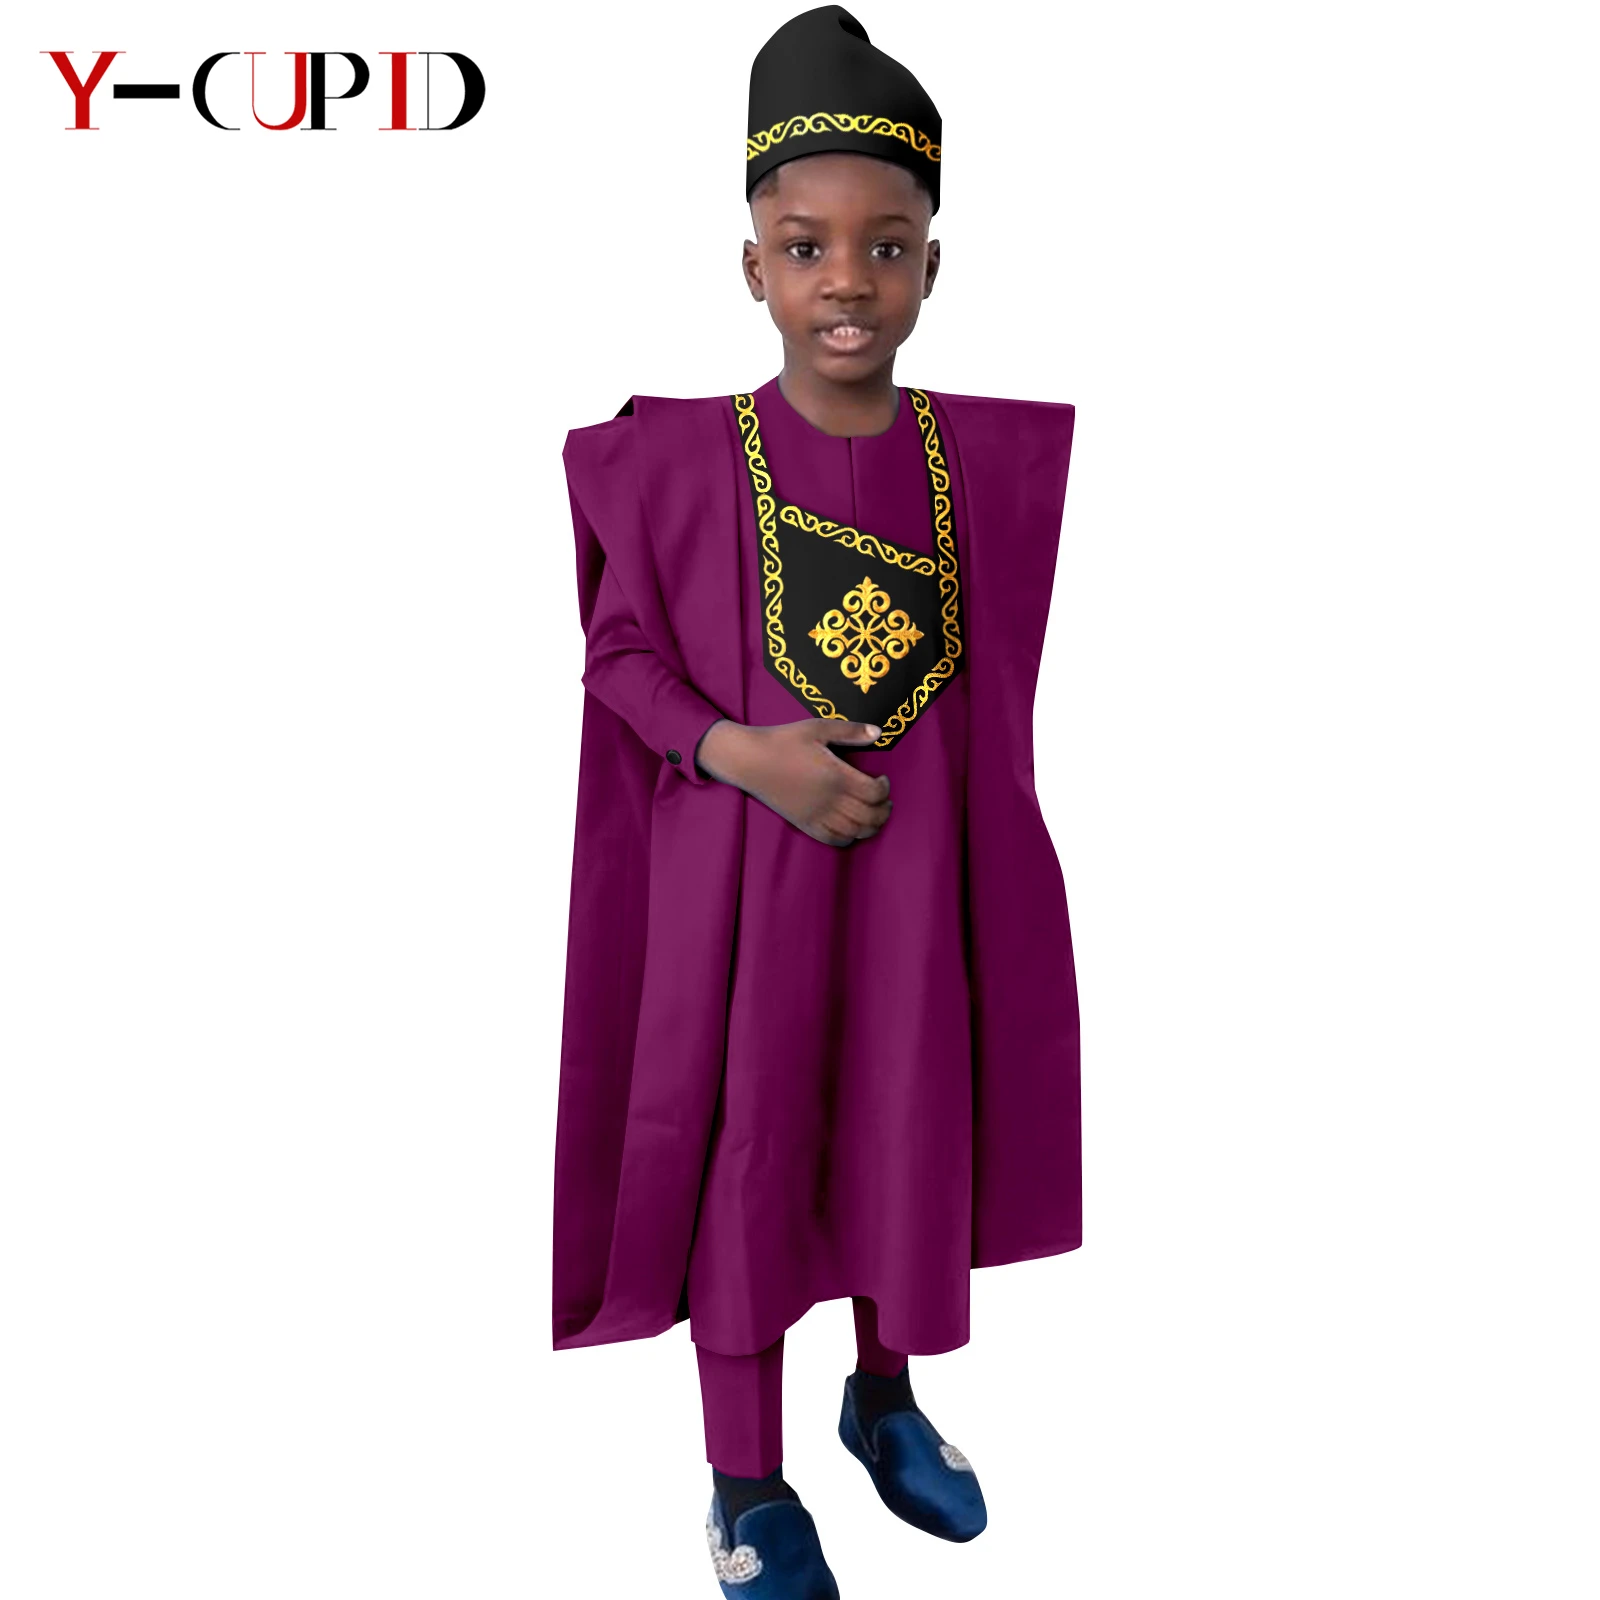 Bazin Riche African Agbada Clothes for Children Boys Casual Dashiki Outfits Wrap Hat+Vest+Shirts+Pants 4 Pieces Sets Y224024 dashiki men african suits embroidery agbada robes shirts pants and hats 4 piece set tribal outfits bazin riche attire a2216054